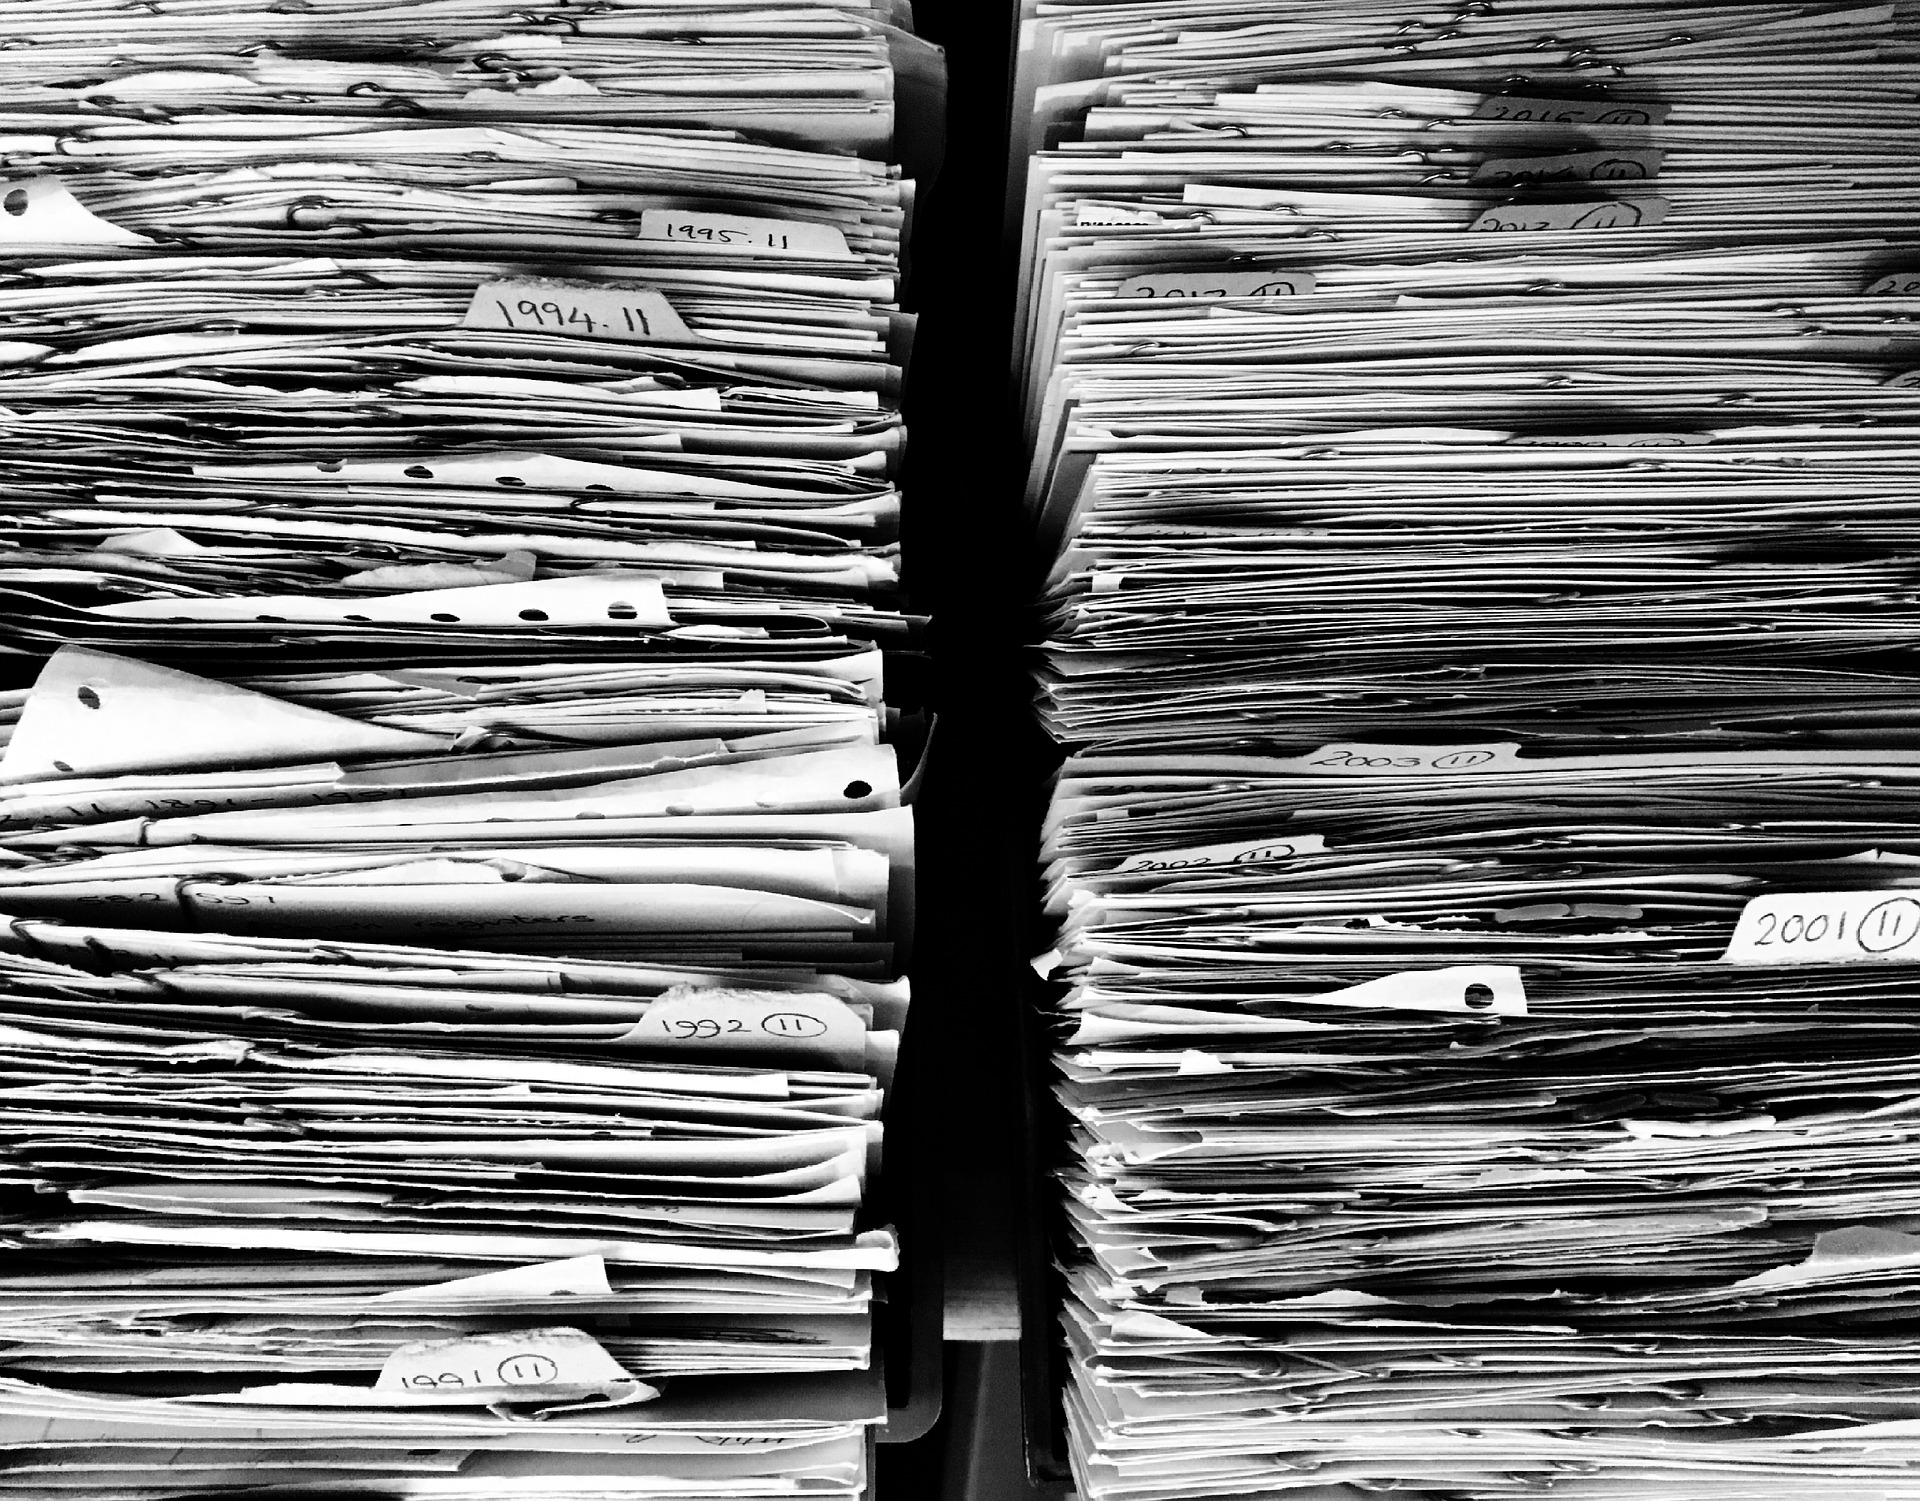 Two stacks of paper files next to each other in black and white